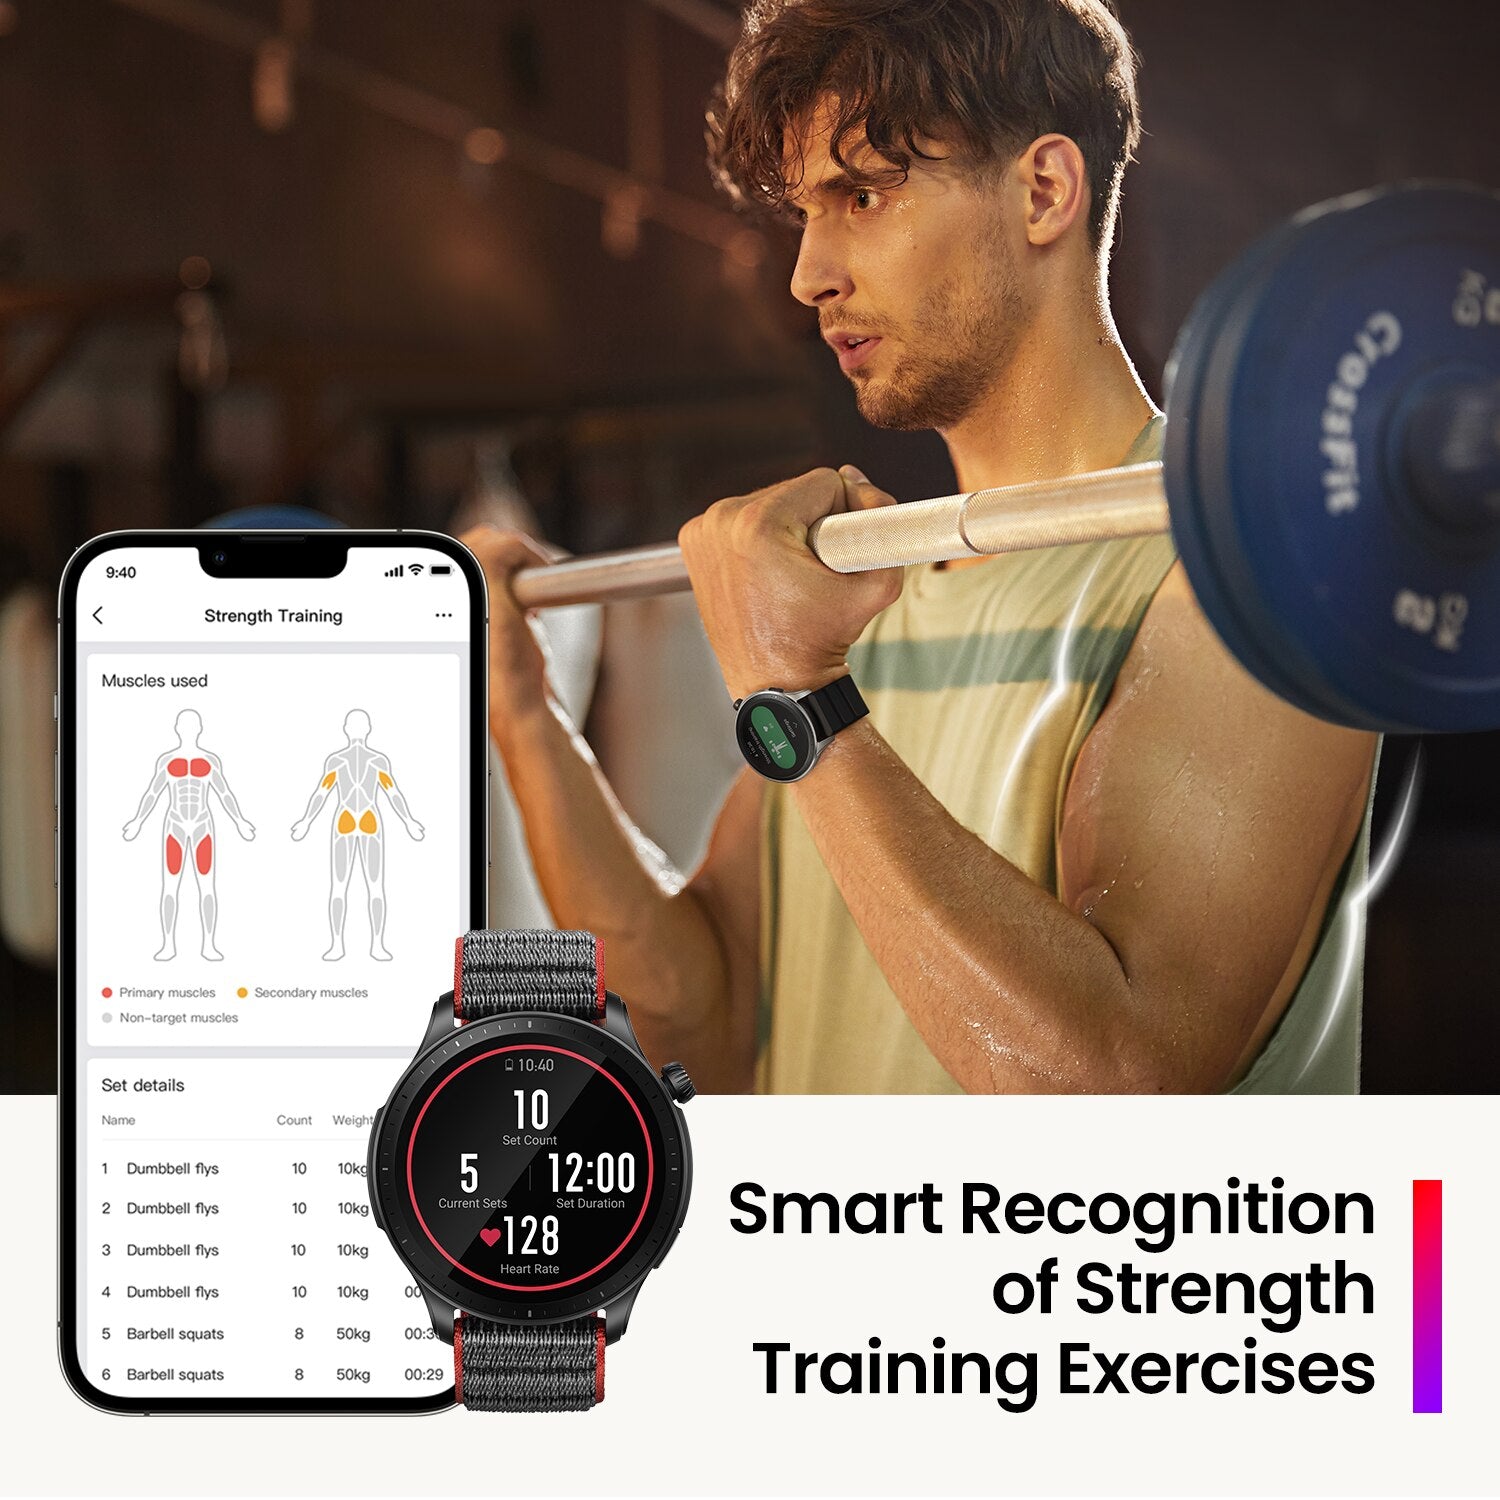 Amazfit GTR 4 Dual-band GPS Smartwatch - Positioning & 150+ Sports Modes